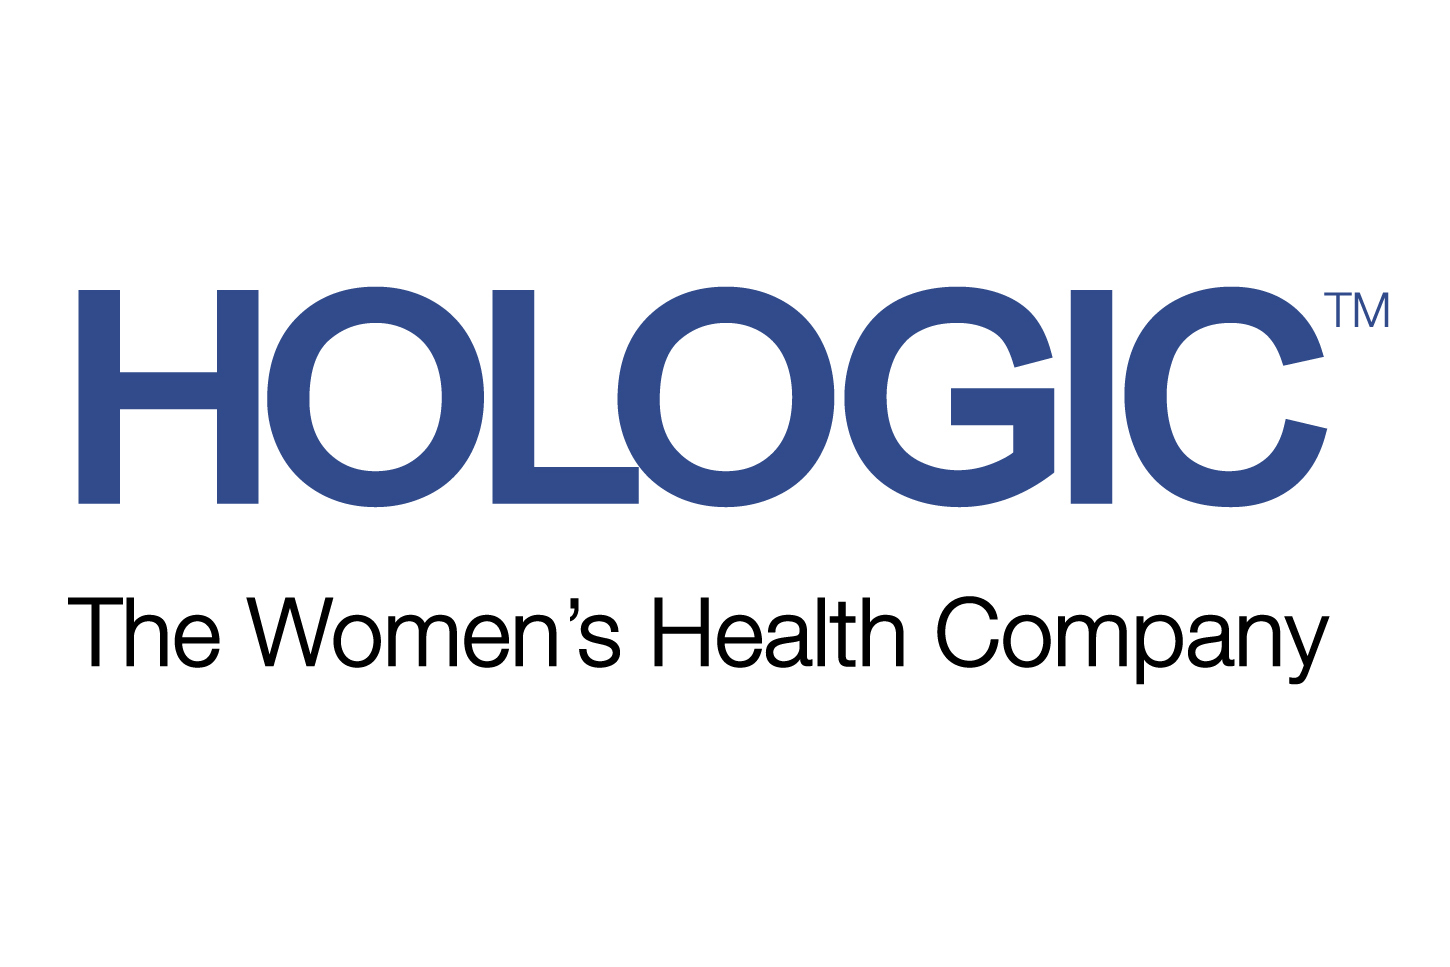 Hologic beats its own Q3 earnings guidance, lowers outlook